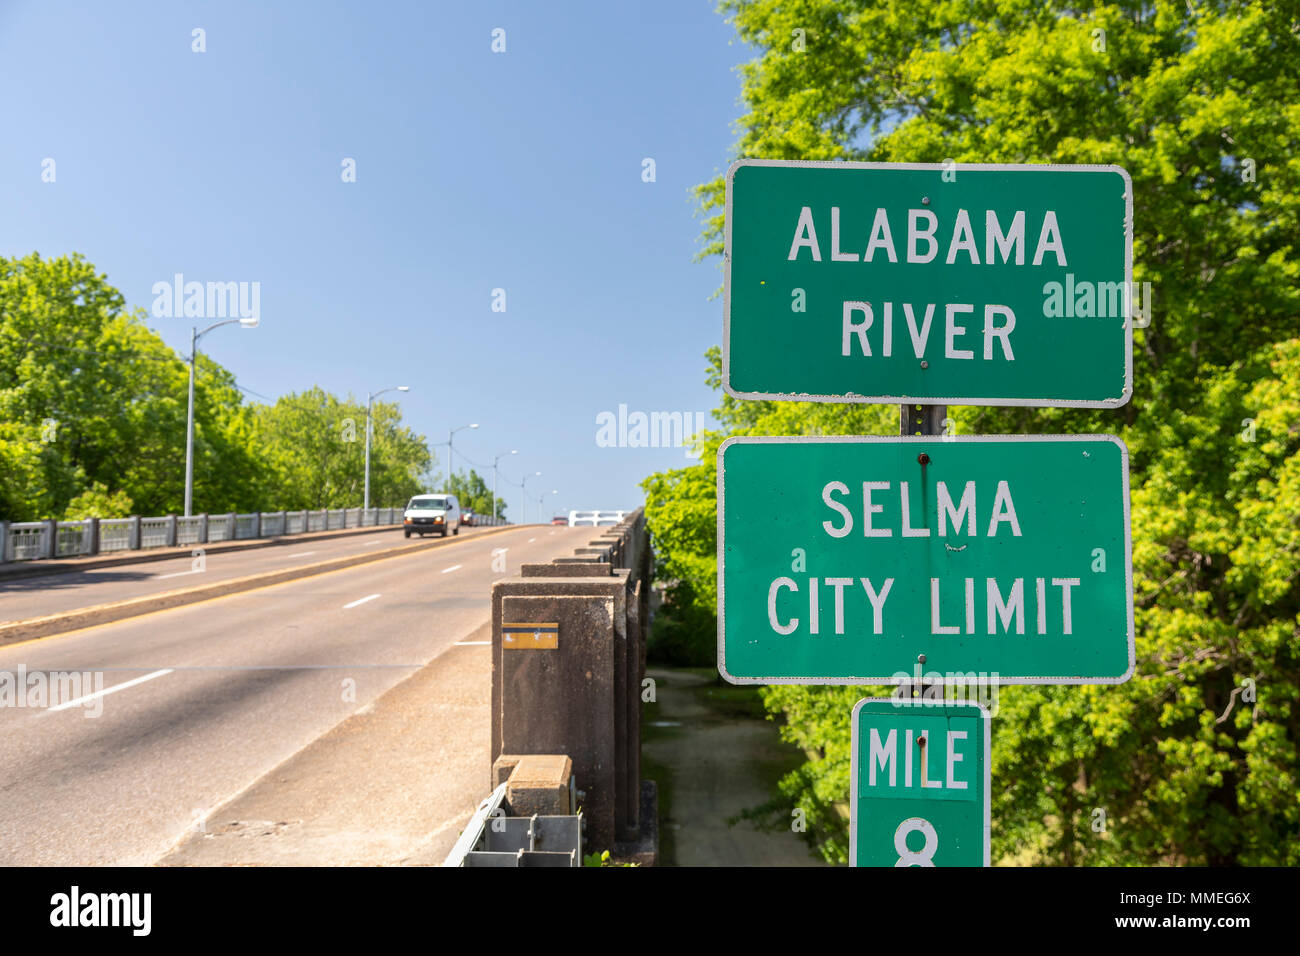 Selma, Alabama - The eastern end of the Edmund Pettus Bridge over the Alabama River, where civil rights demonstrators demanding the right to vote were Stock Photo